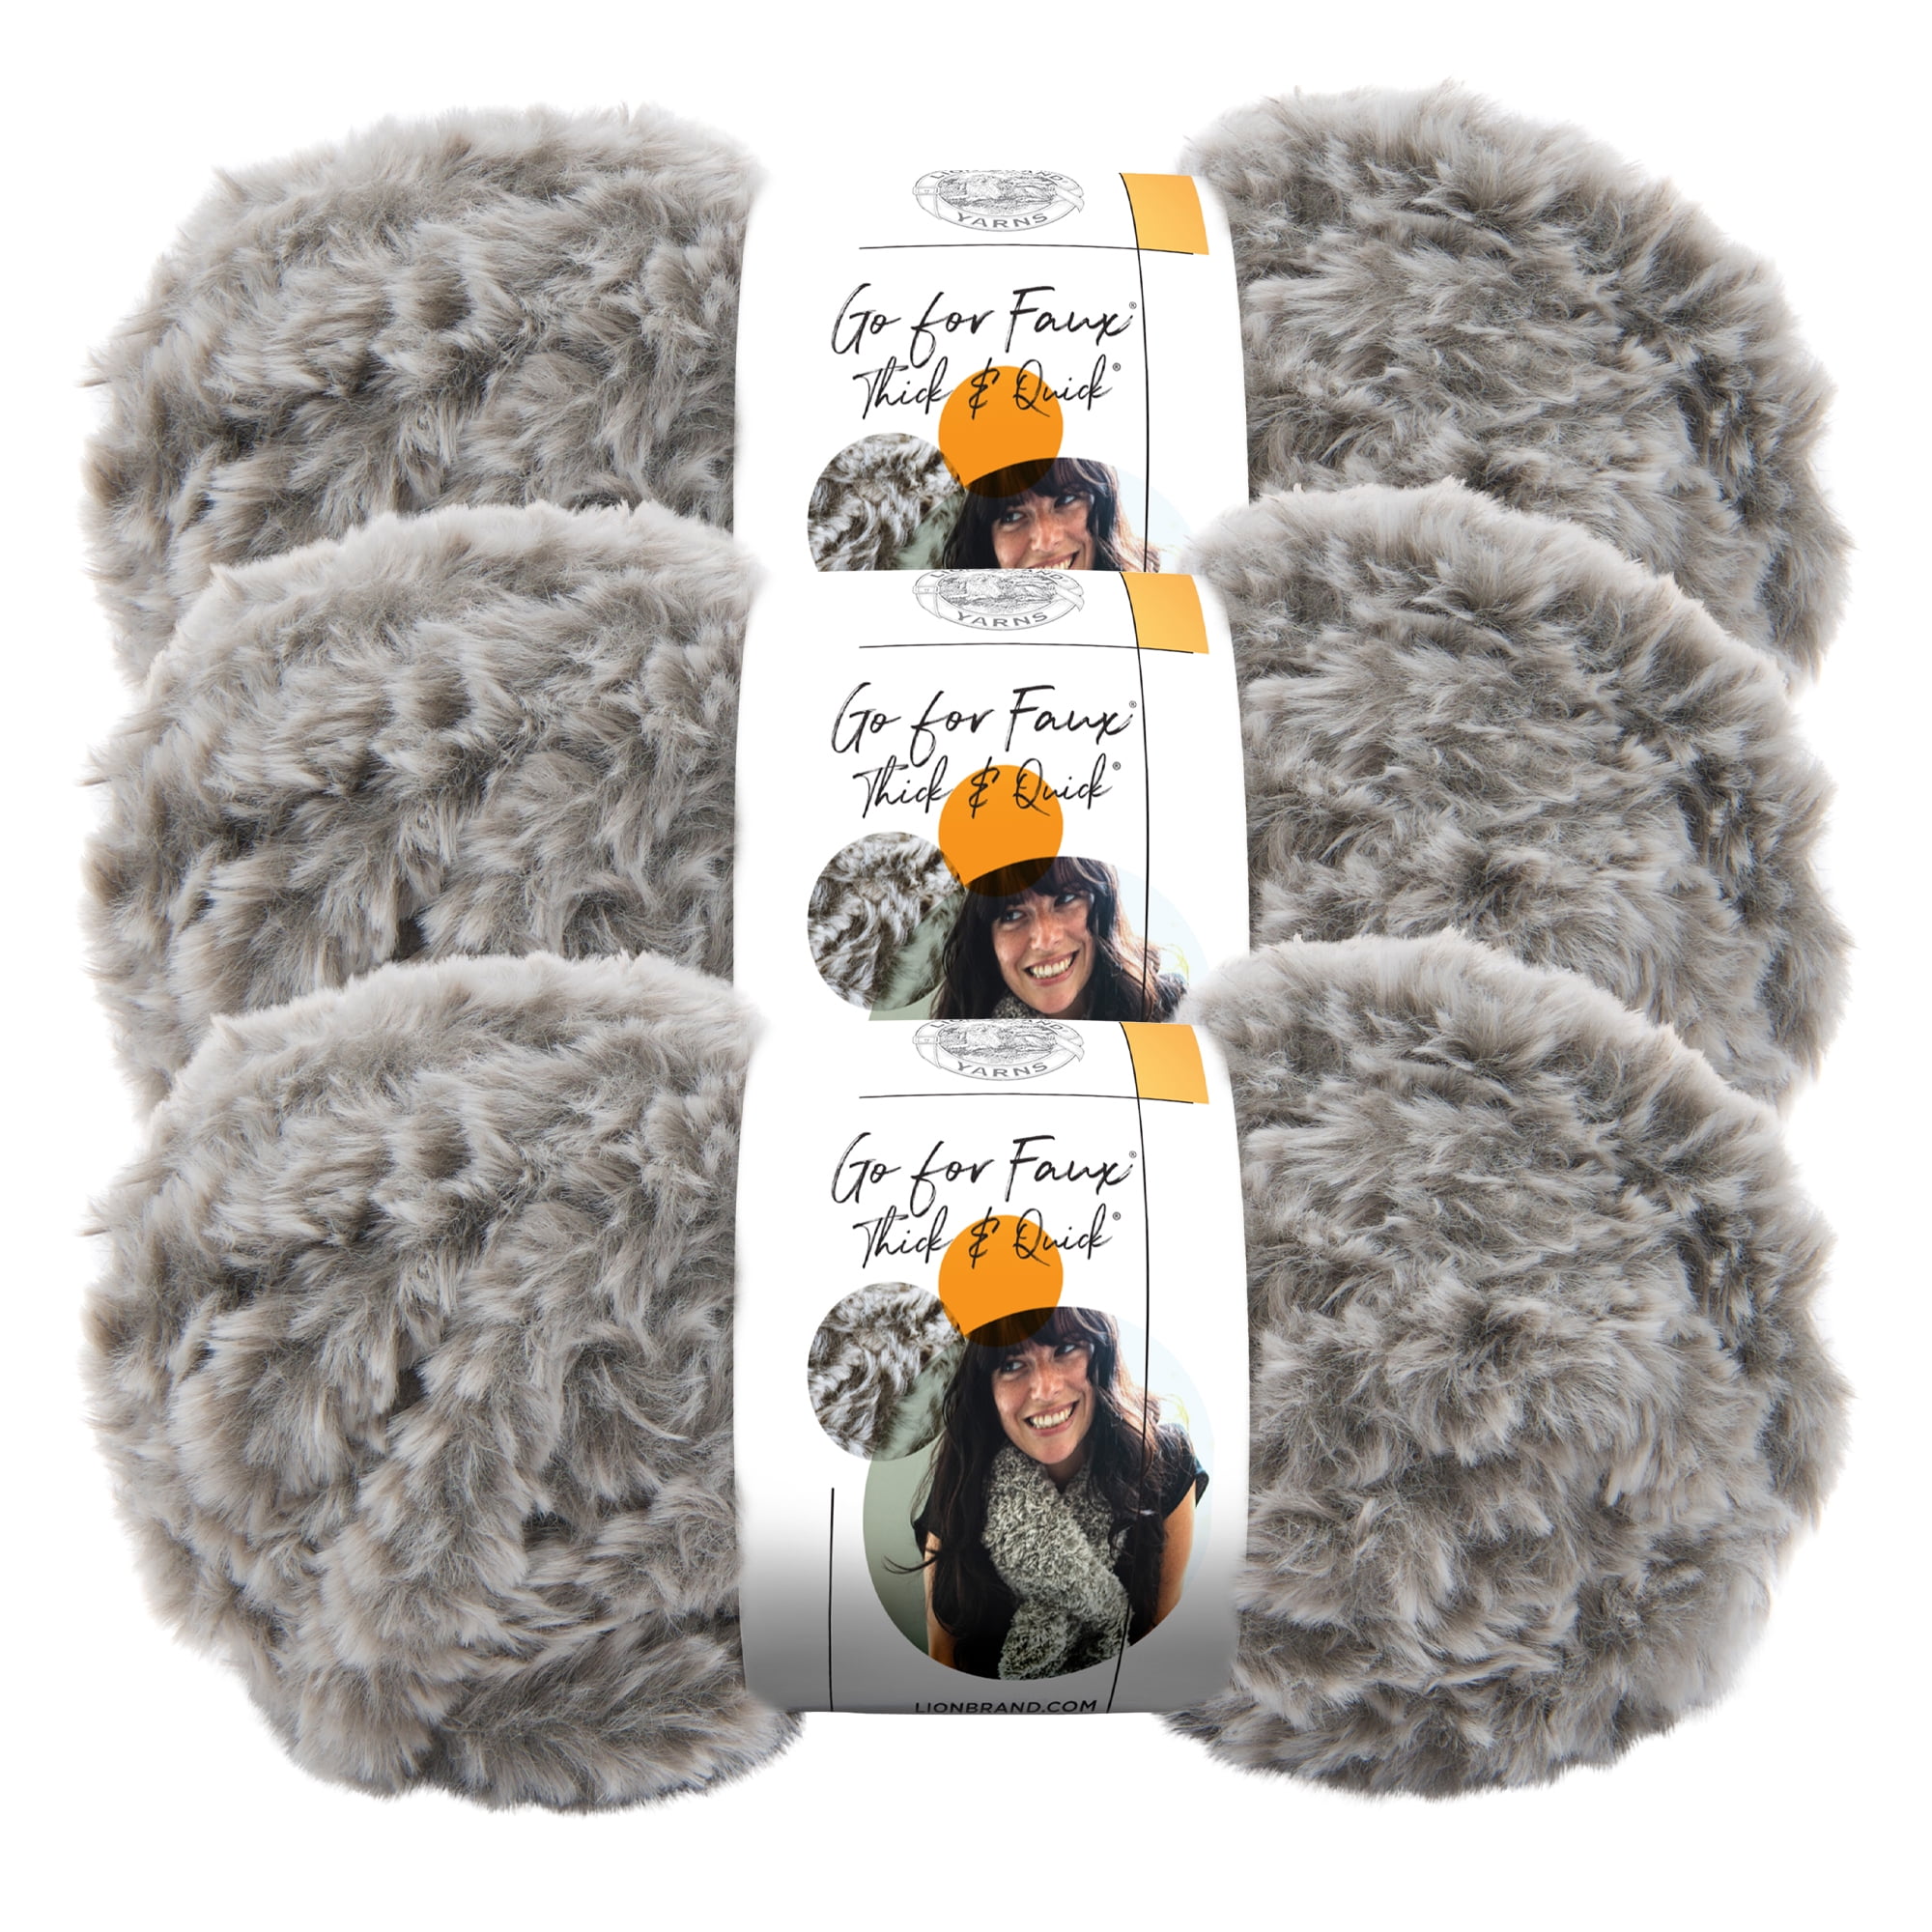 Lion Brand Yarn Go for Faux yarn, BLACK PANTHER